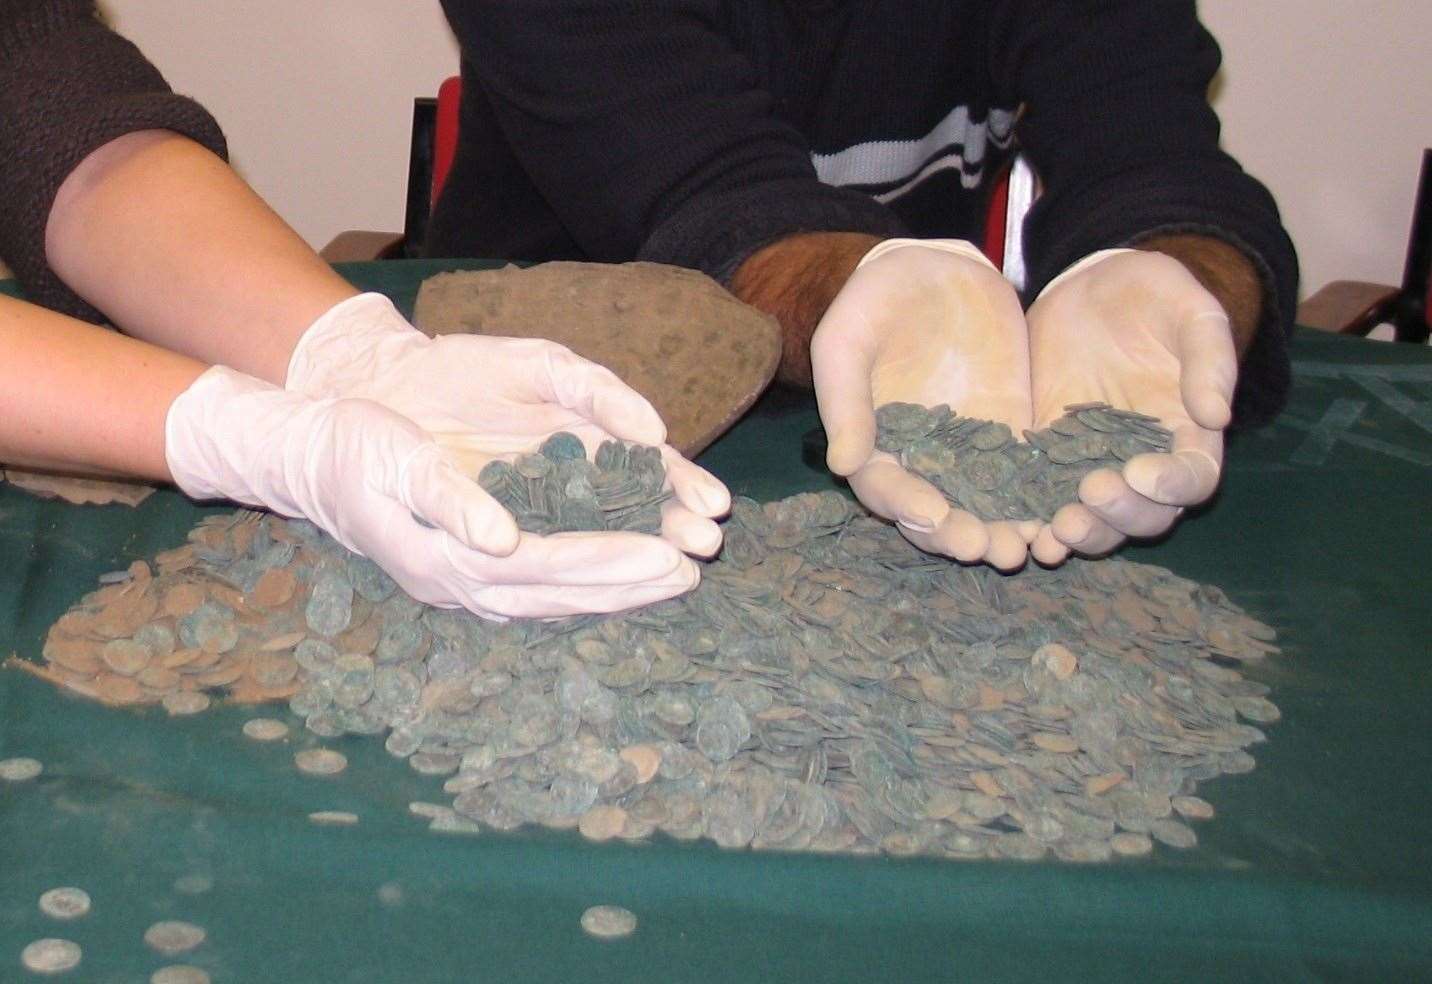 The Roman hoard of 3,600 bronze coins was held at County Hall, Maidstone, after it was uncovered at site in Medway Valley in 2006. Supplied by KCC